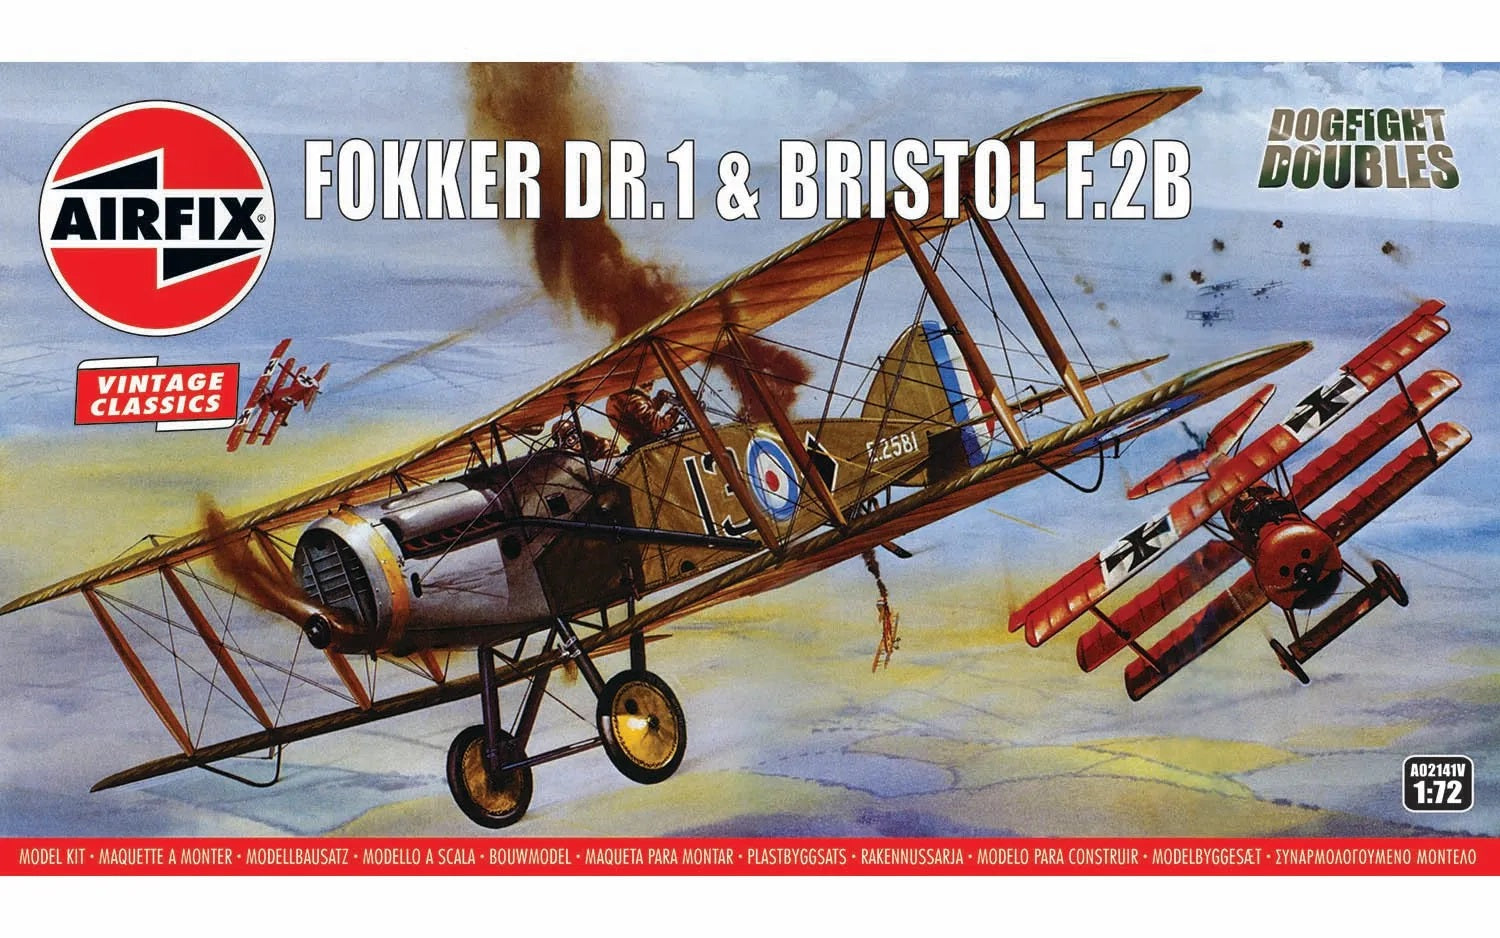 Airfix Dogfight Double Fokker DR1 & Bristol F2B 1/72 A02141V